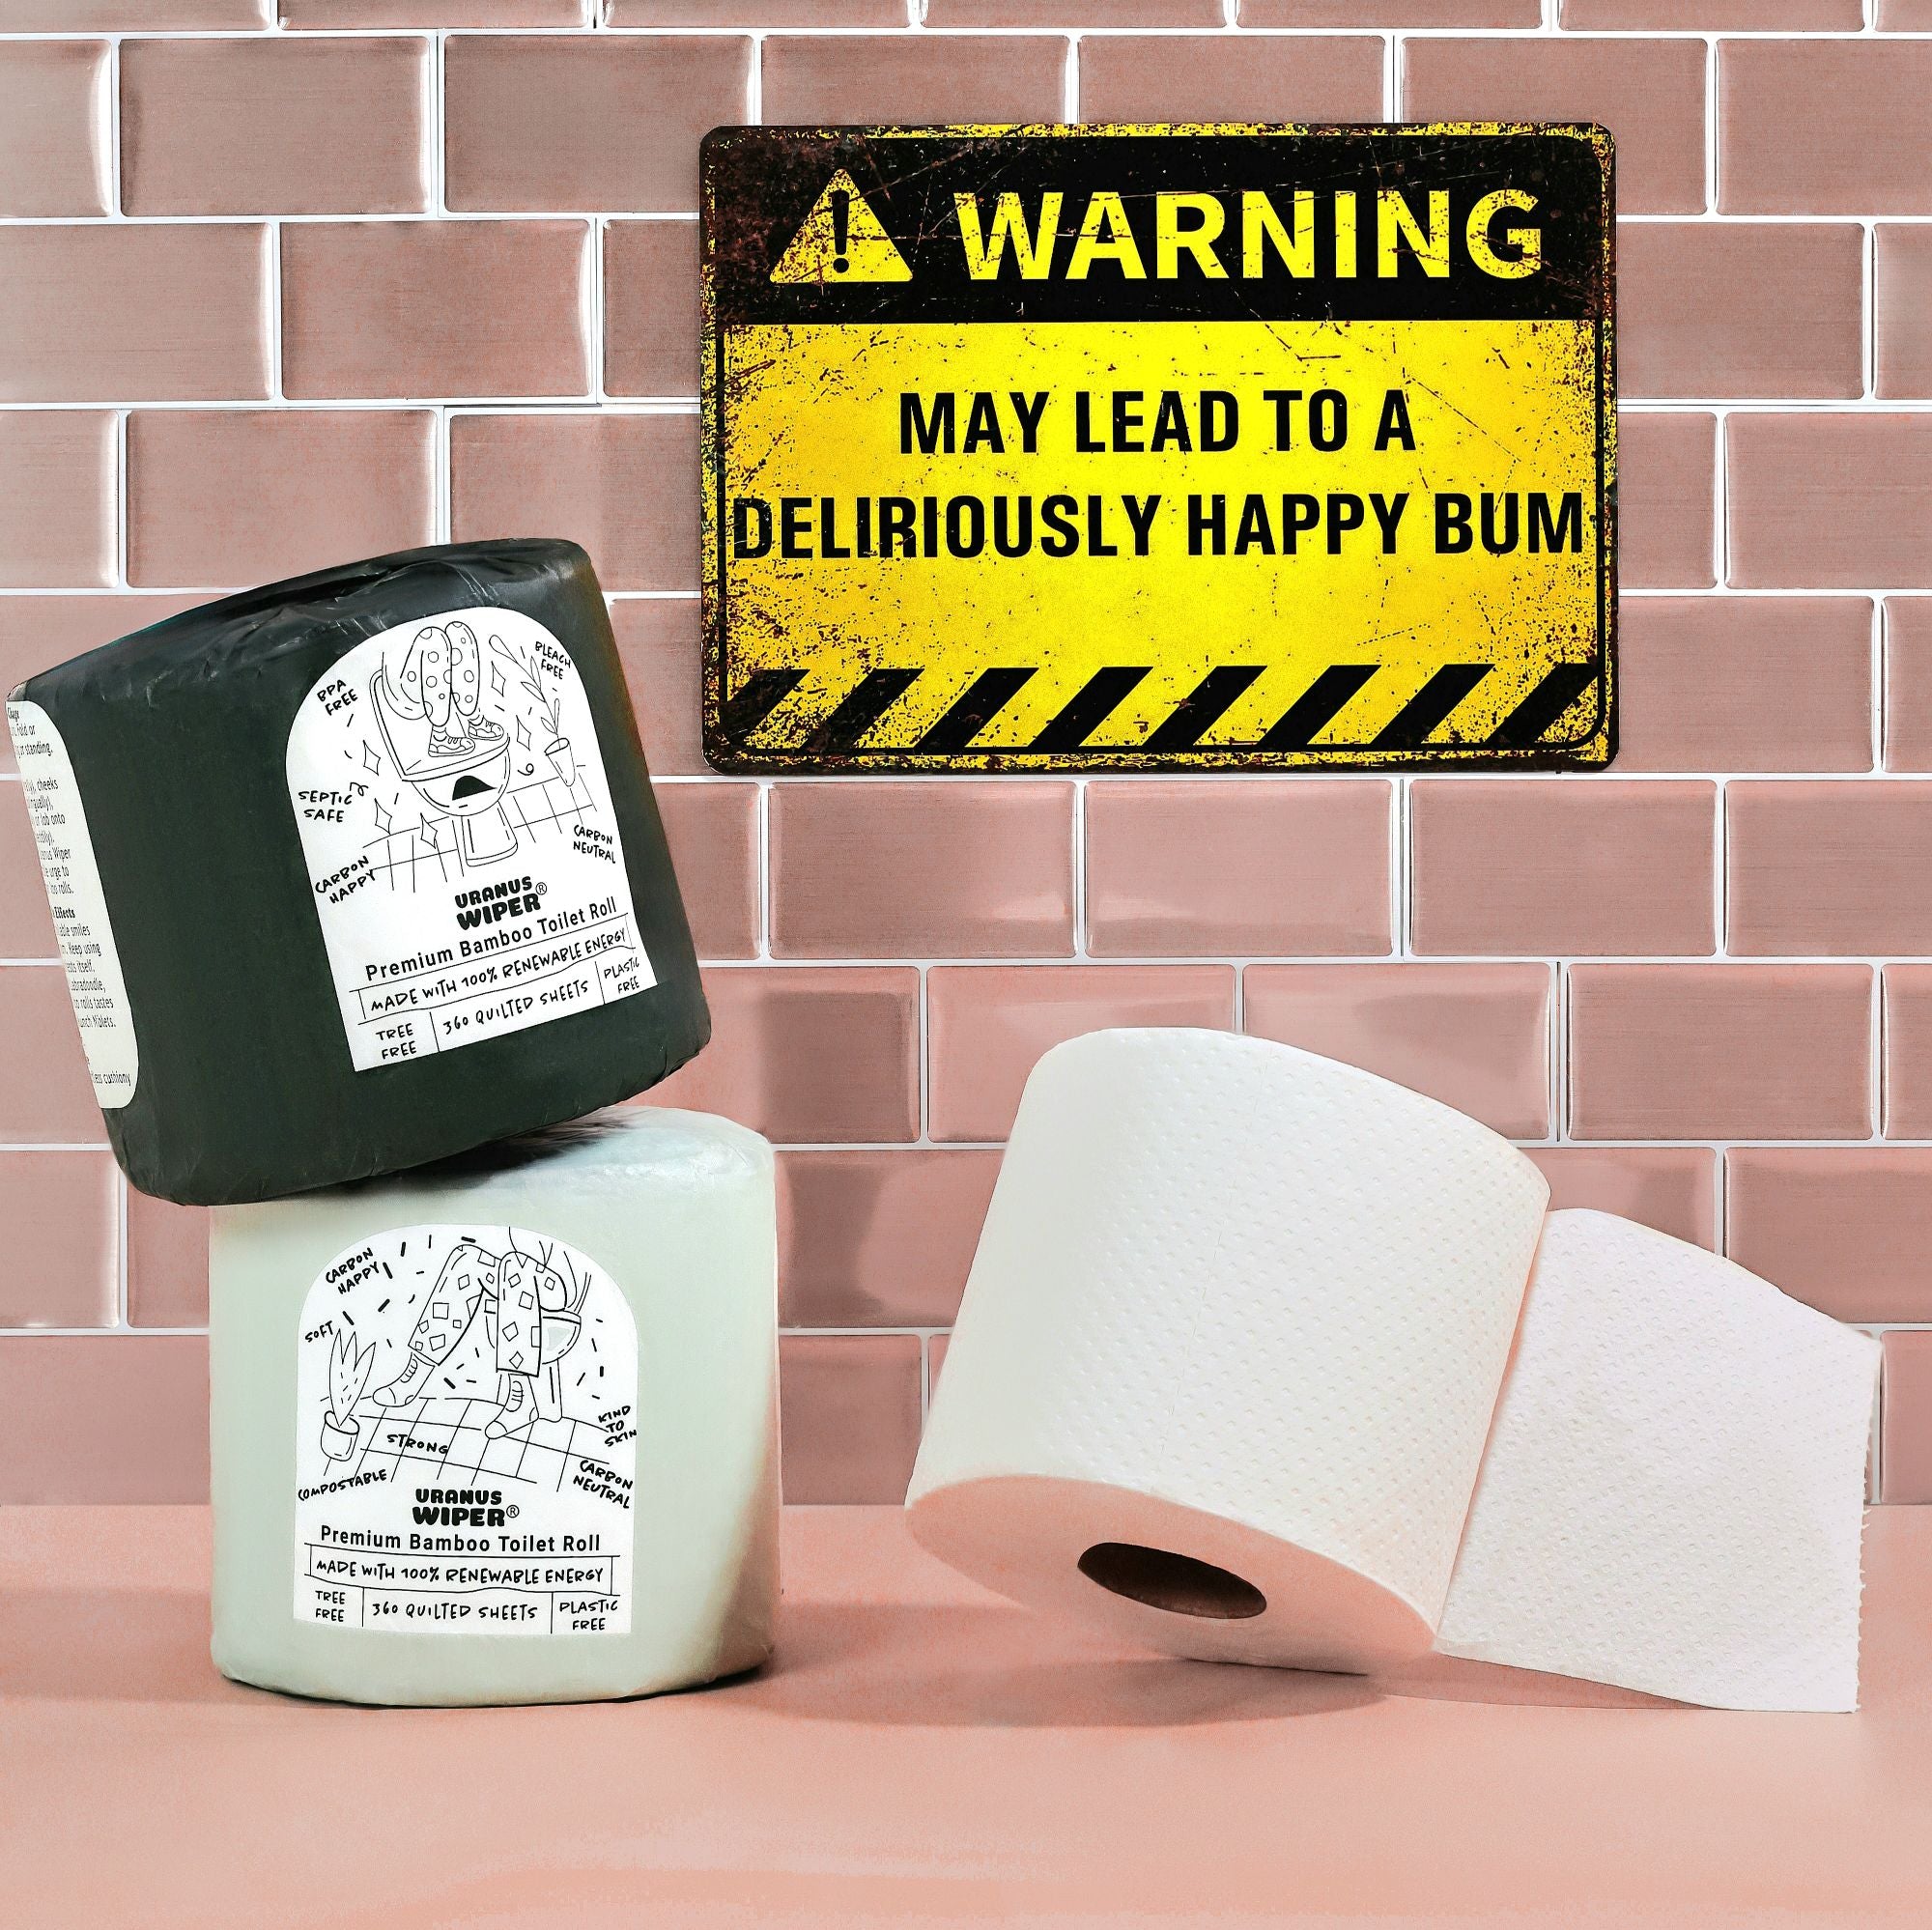 Uranus Wiper toilet roll with funny warning sign